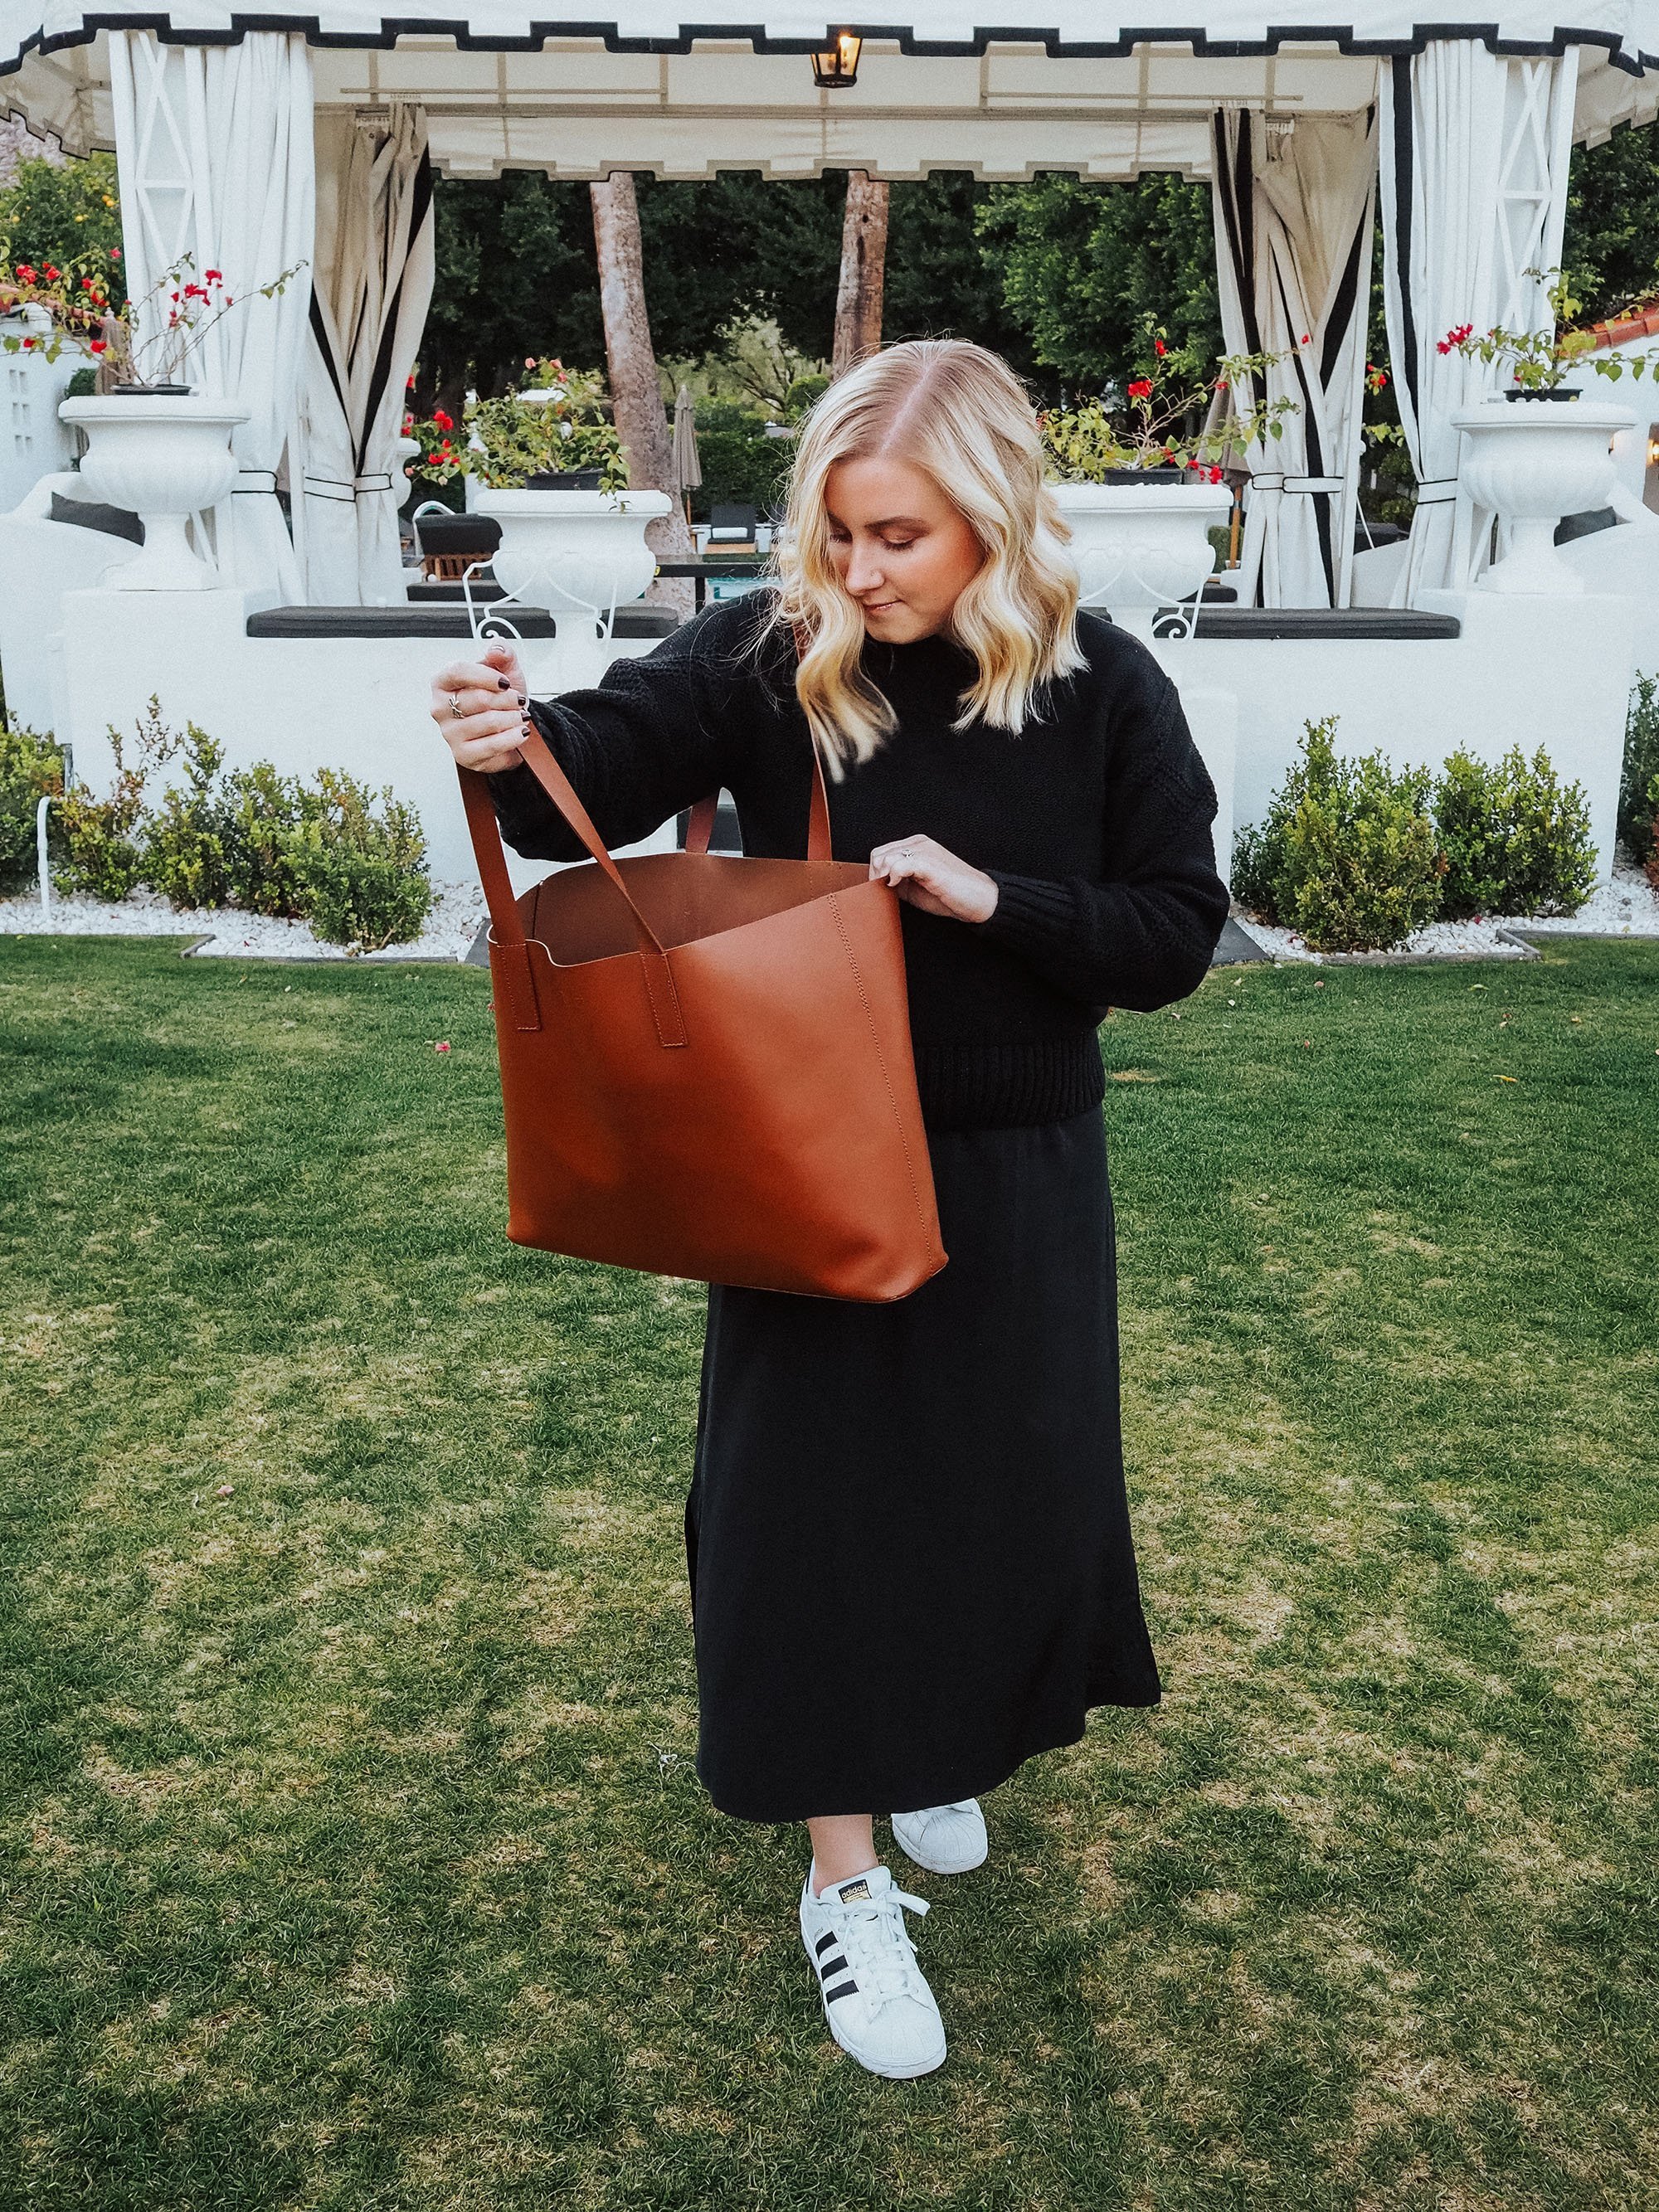 Everlane Review Dipped Zip Tote {Updated Feb 2018} — Fairly Curated